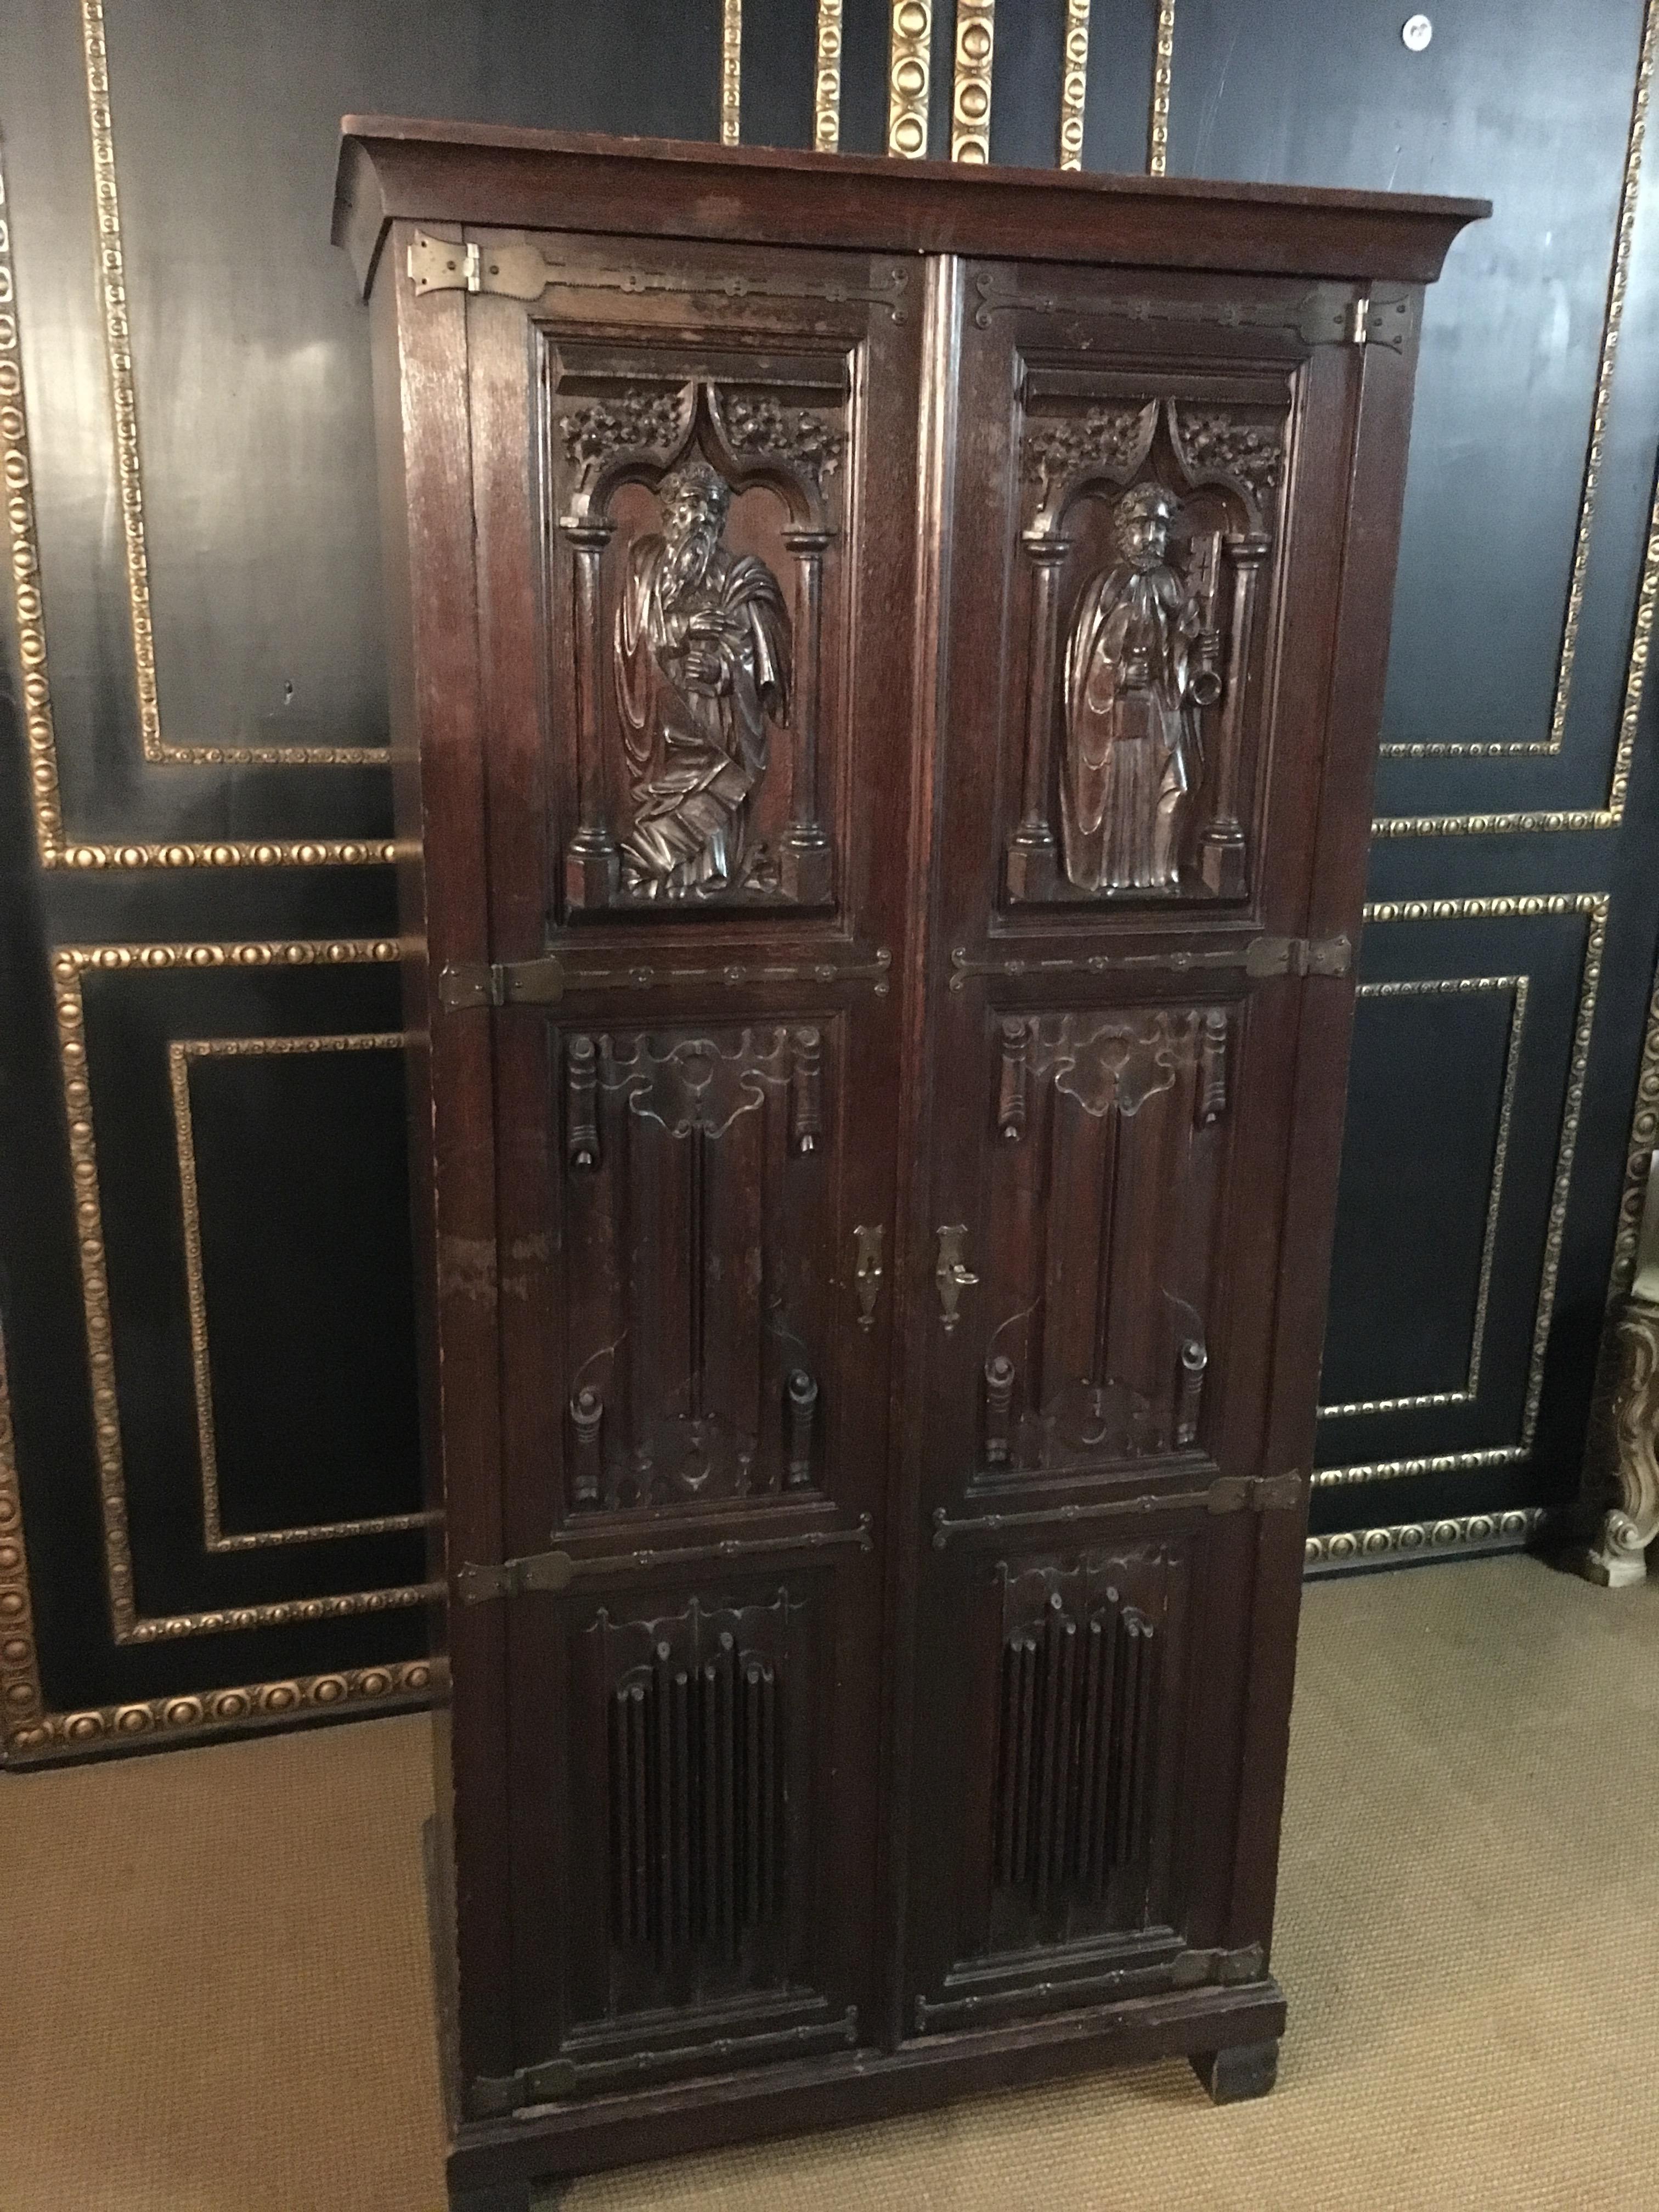 Solid oak with rich carving. Two doors.
High-quality carving with each right and left 1 figure fully carved.
The right figure has a key in his hand and the left figure 1 sword.
The doors are decorated with brass.